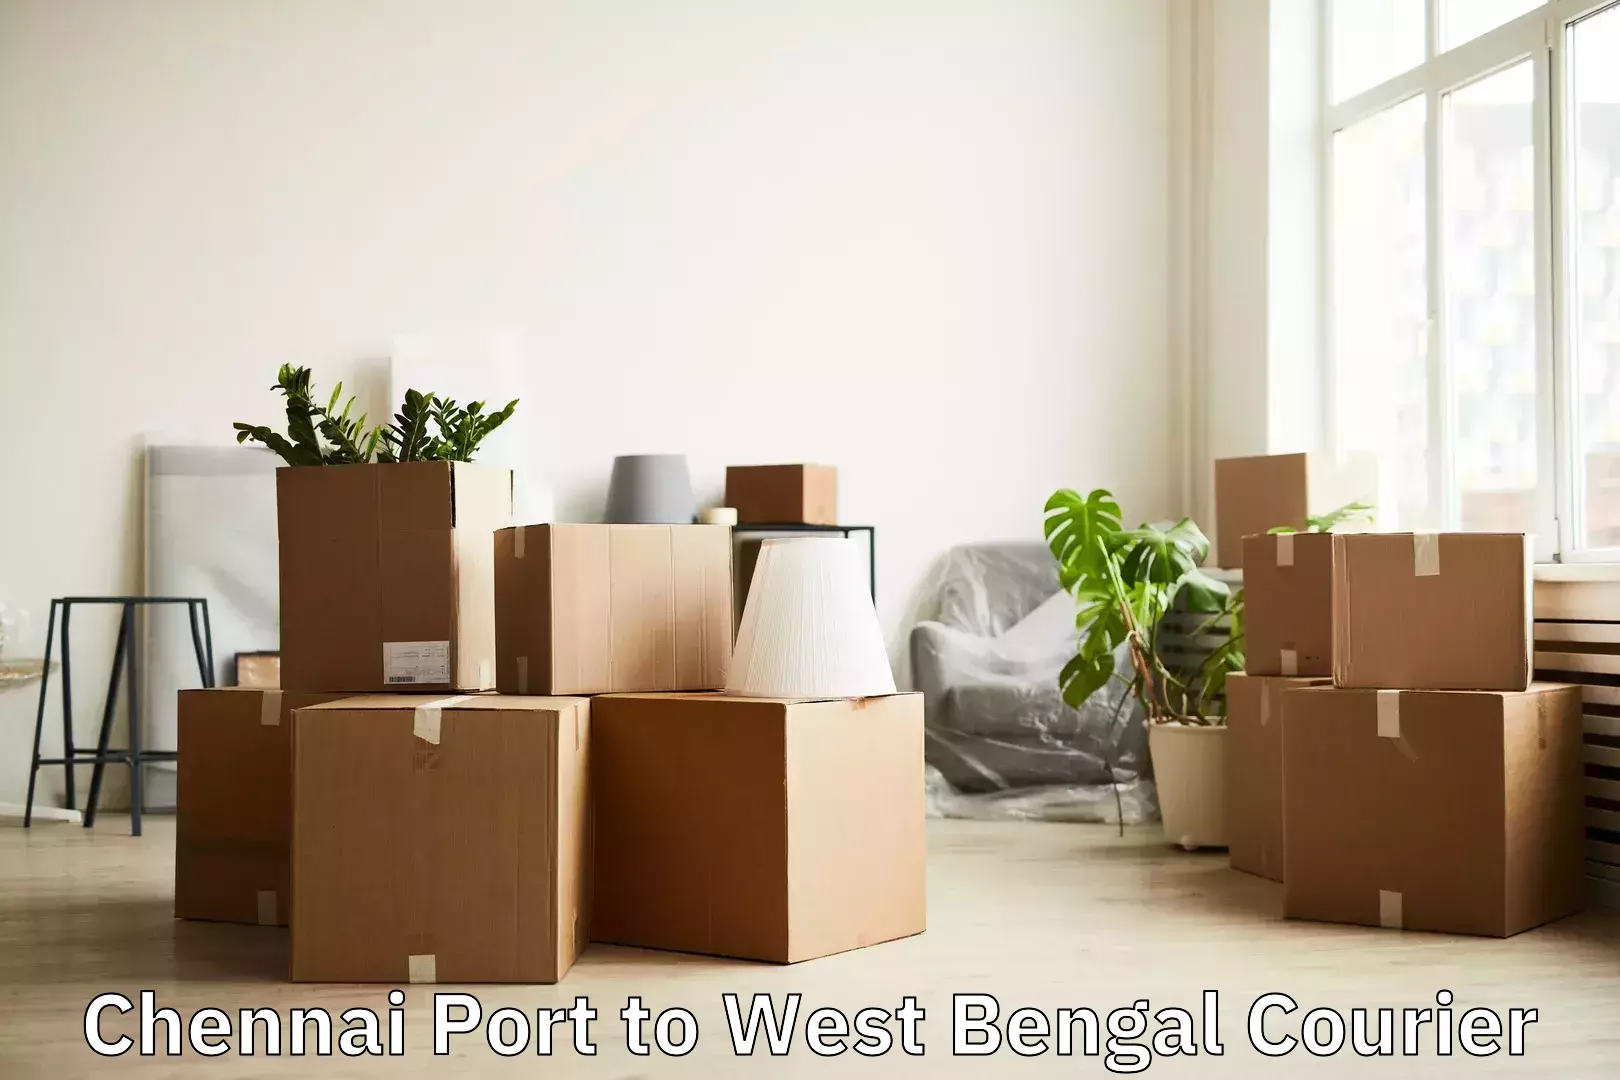 Luggage transport consulting in Chennai Port to Chhatna